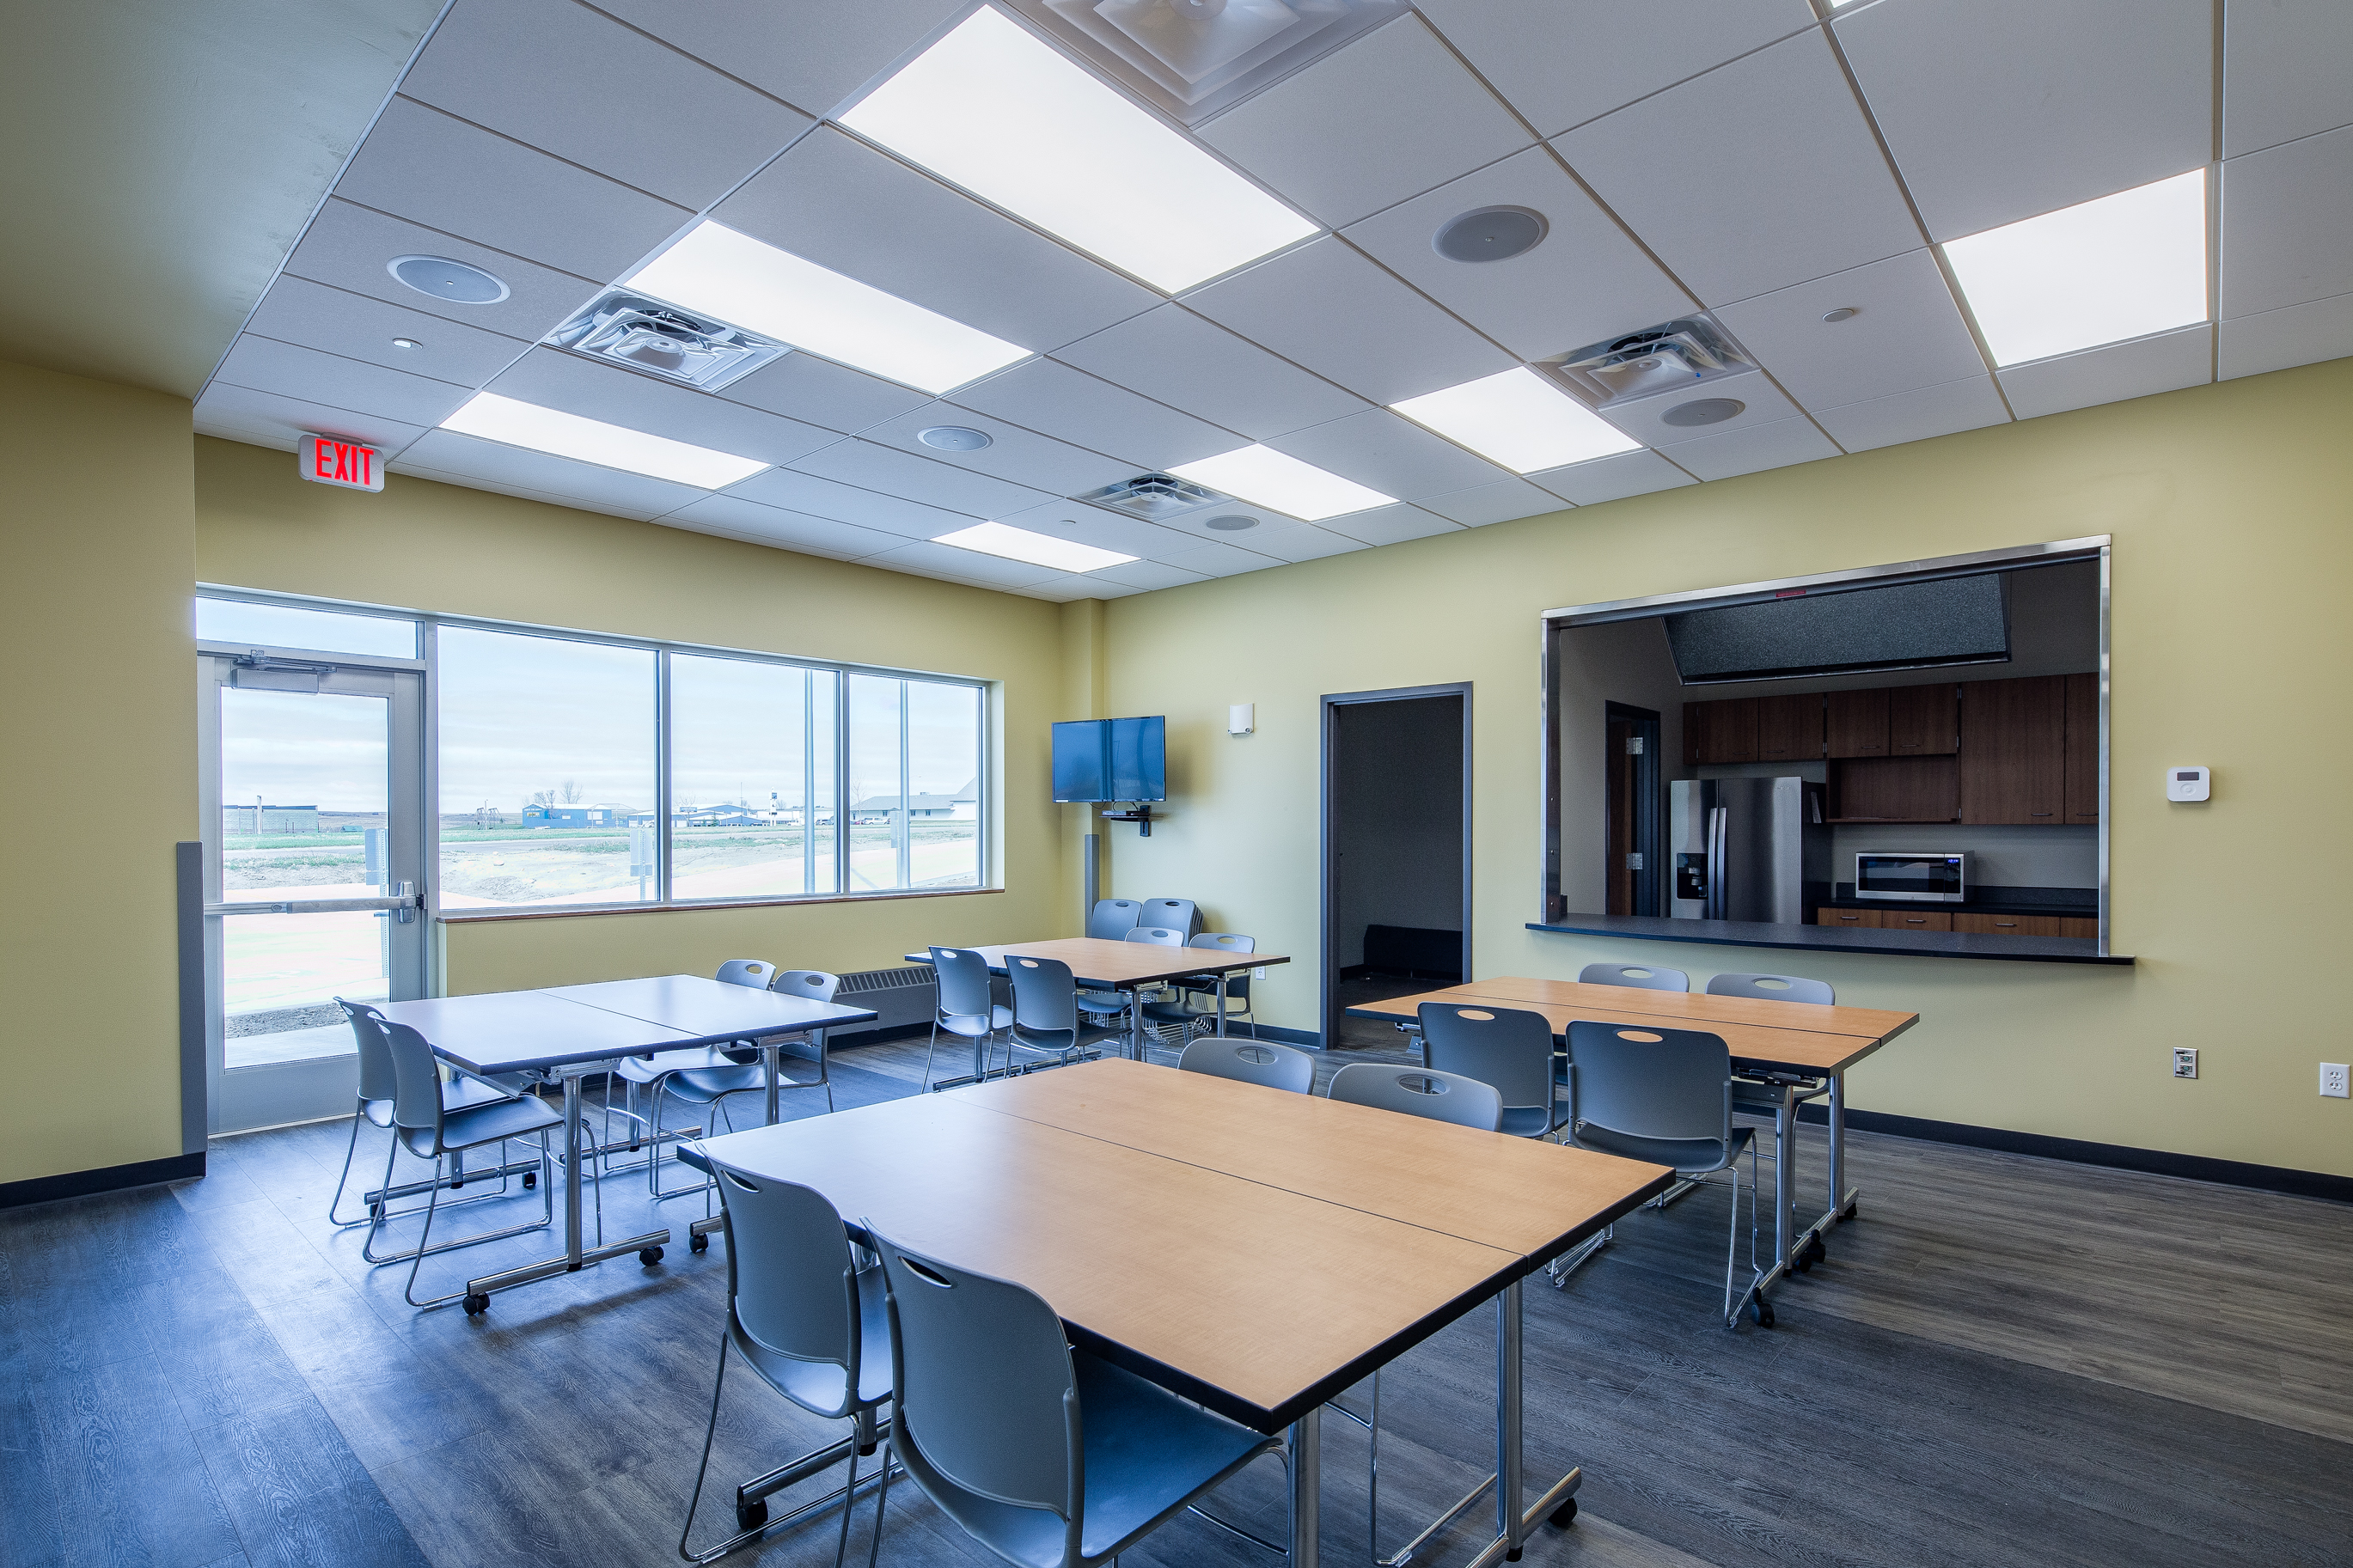 Energy Wellness Center community room and kitchen